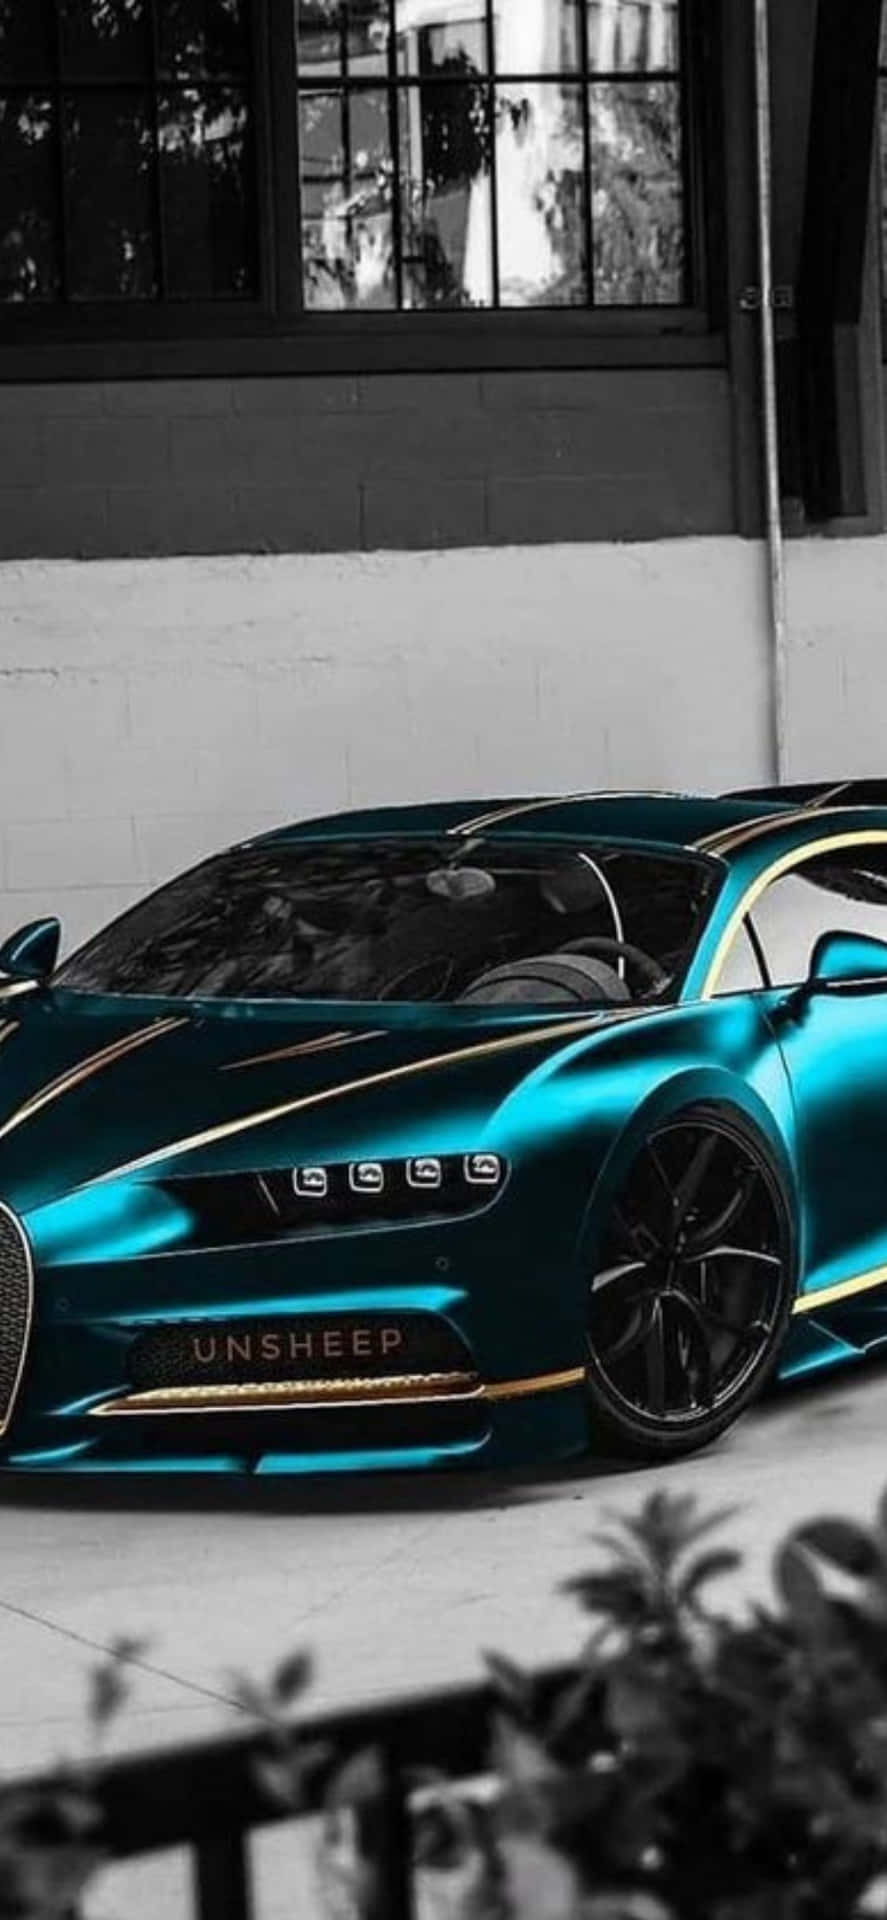 Luxurious Bugatti paired with modern Iphone Xs